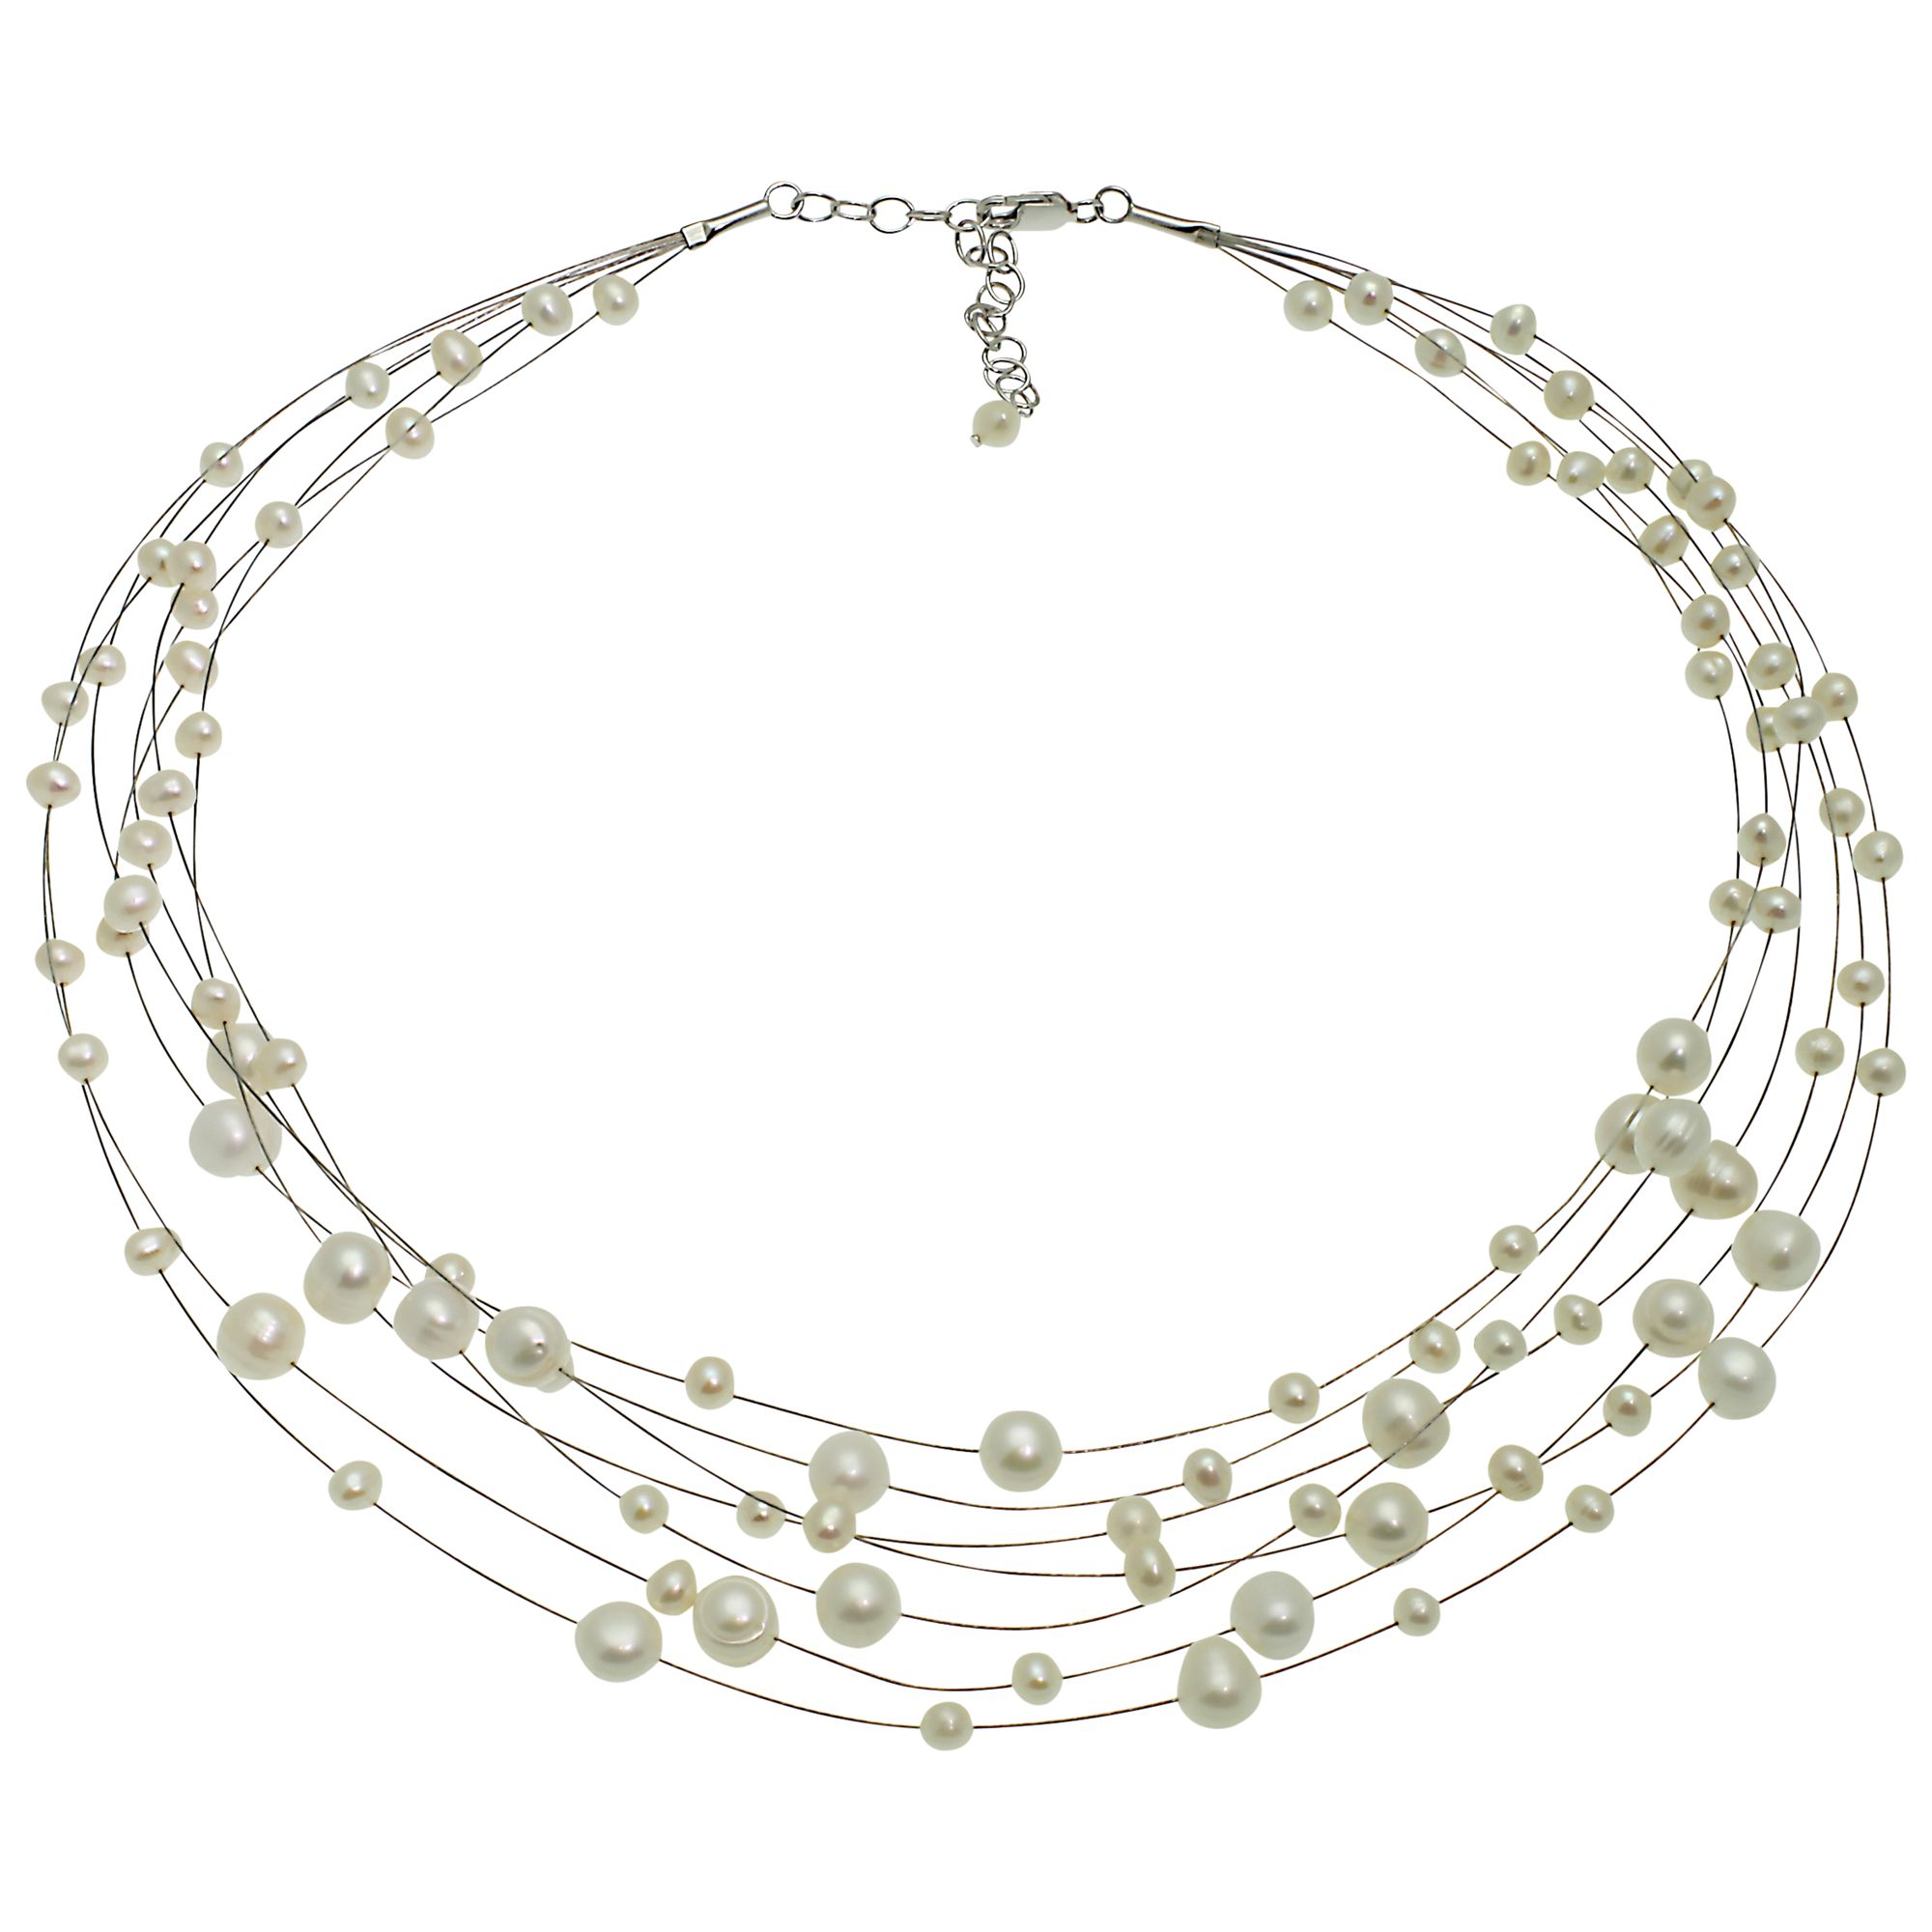 Lido Multi-Strand Freshwater Pearl Necklace,